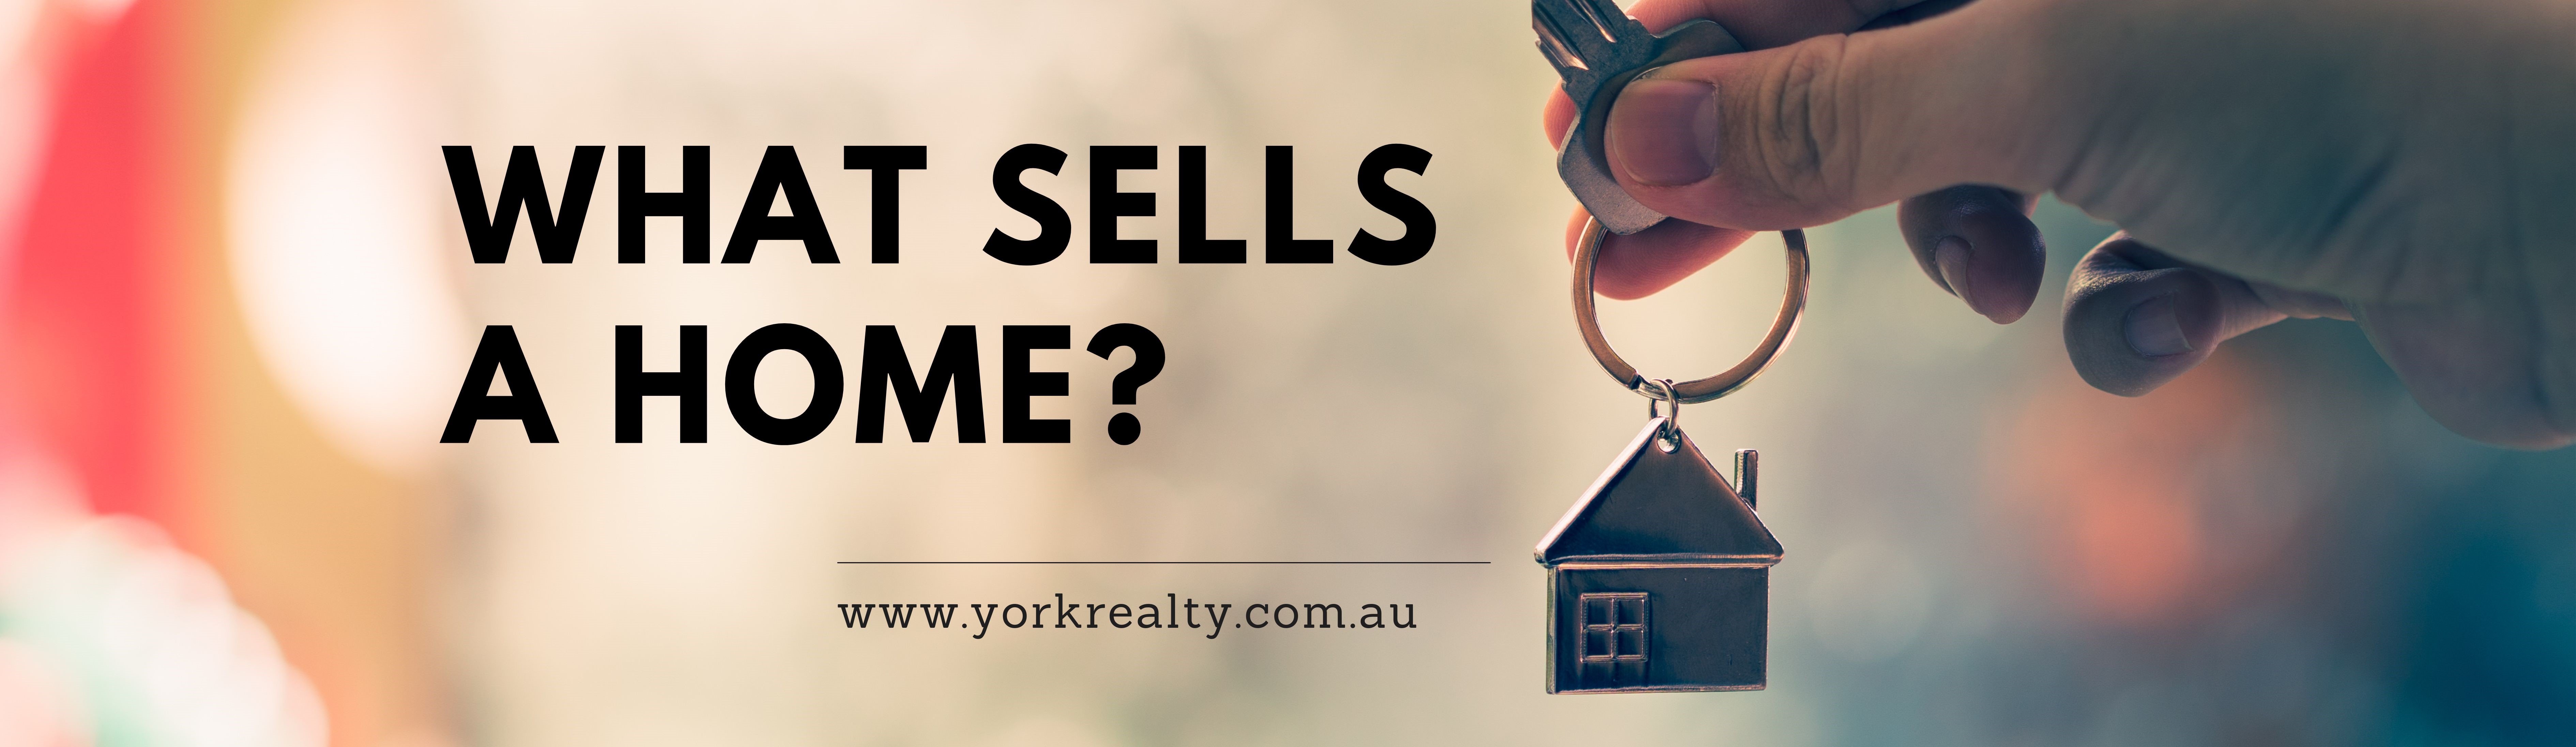 What sells a home